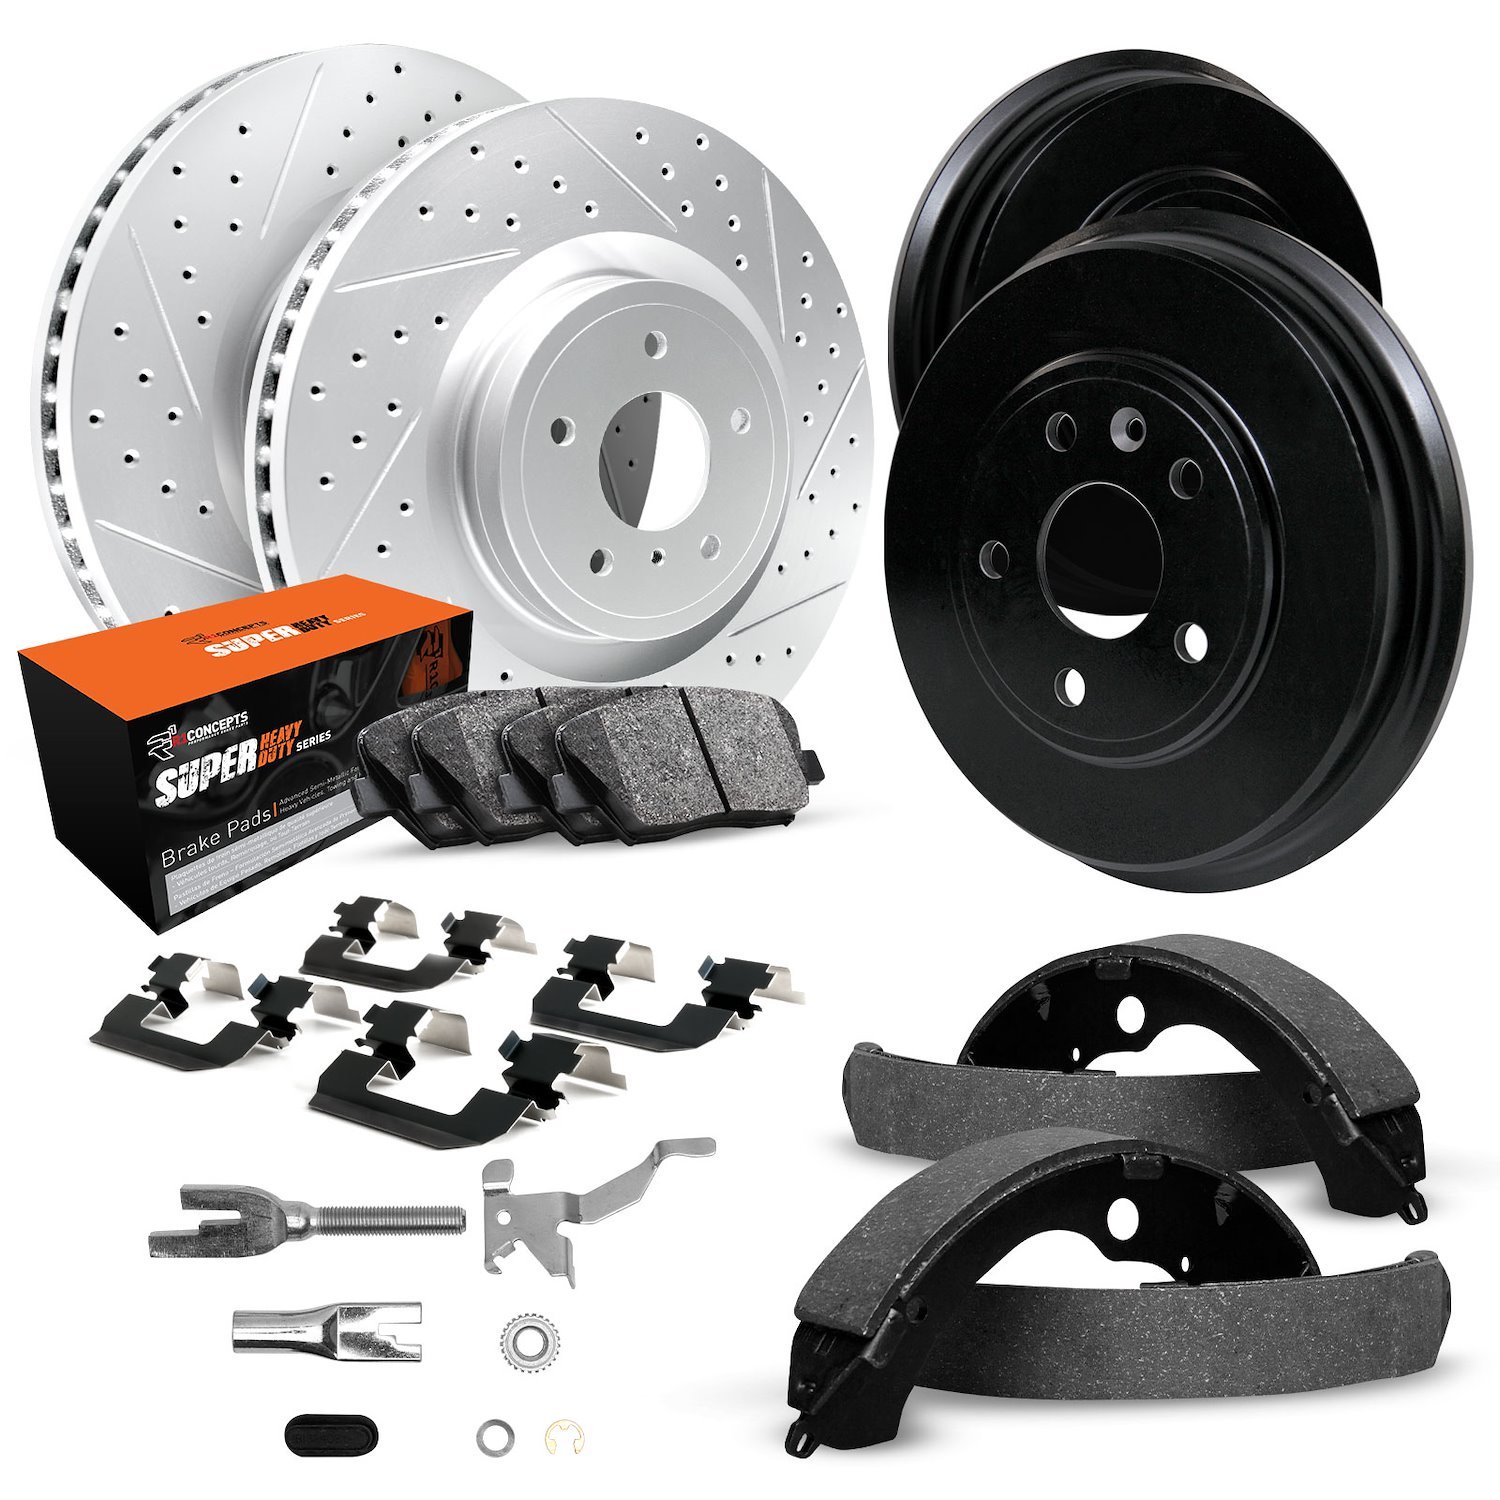 GEO-Carbon Drilled/Slotted Rotors/Drums w/Super-Duty Pads/Shoes/Hardware/Adjusters, 1978-1993 GM, Position: Front/Rear